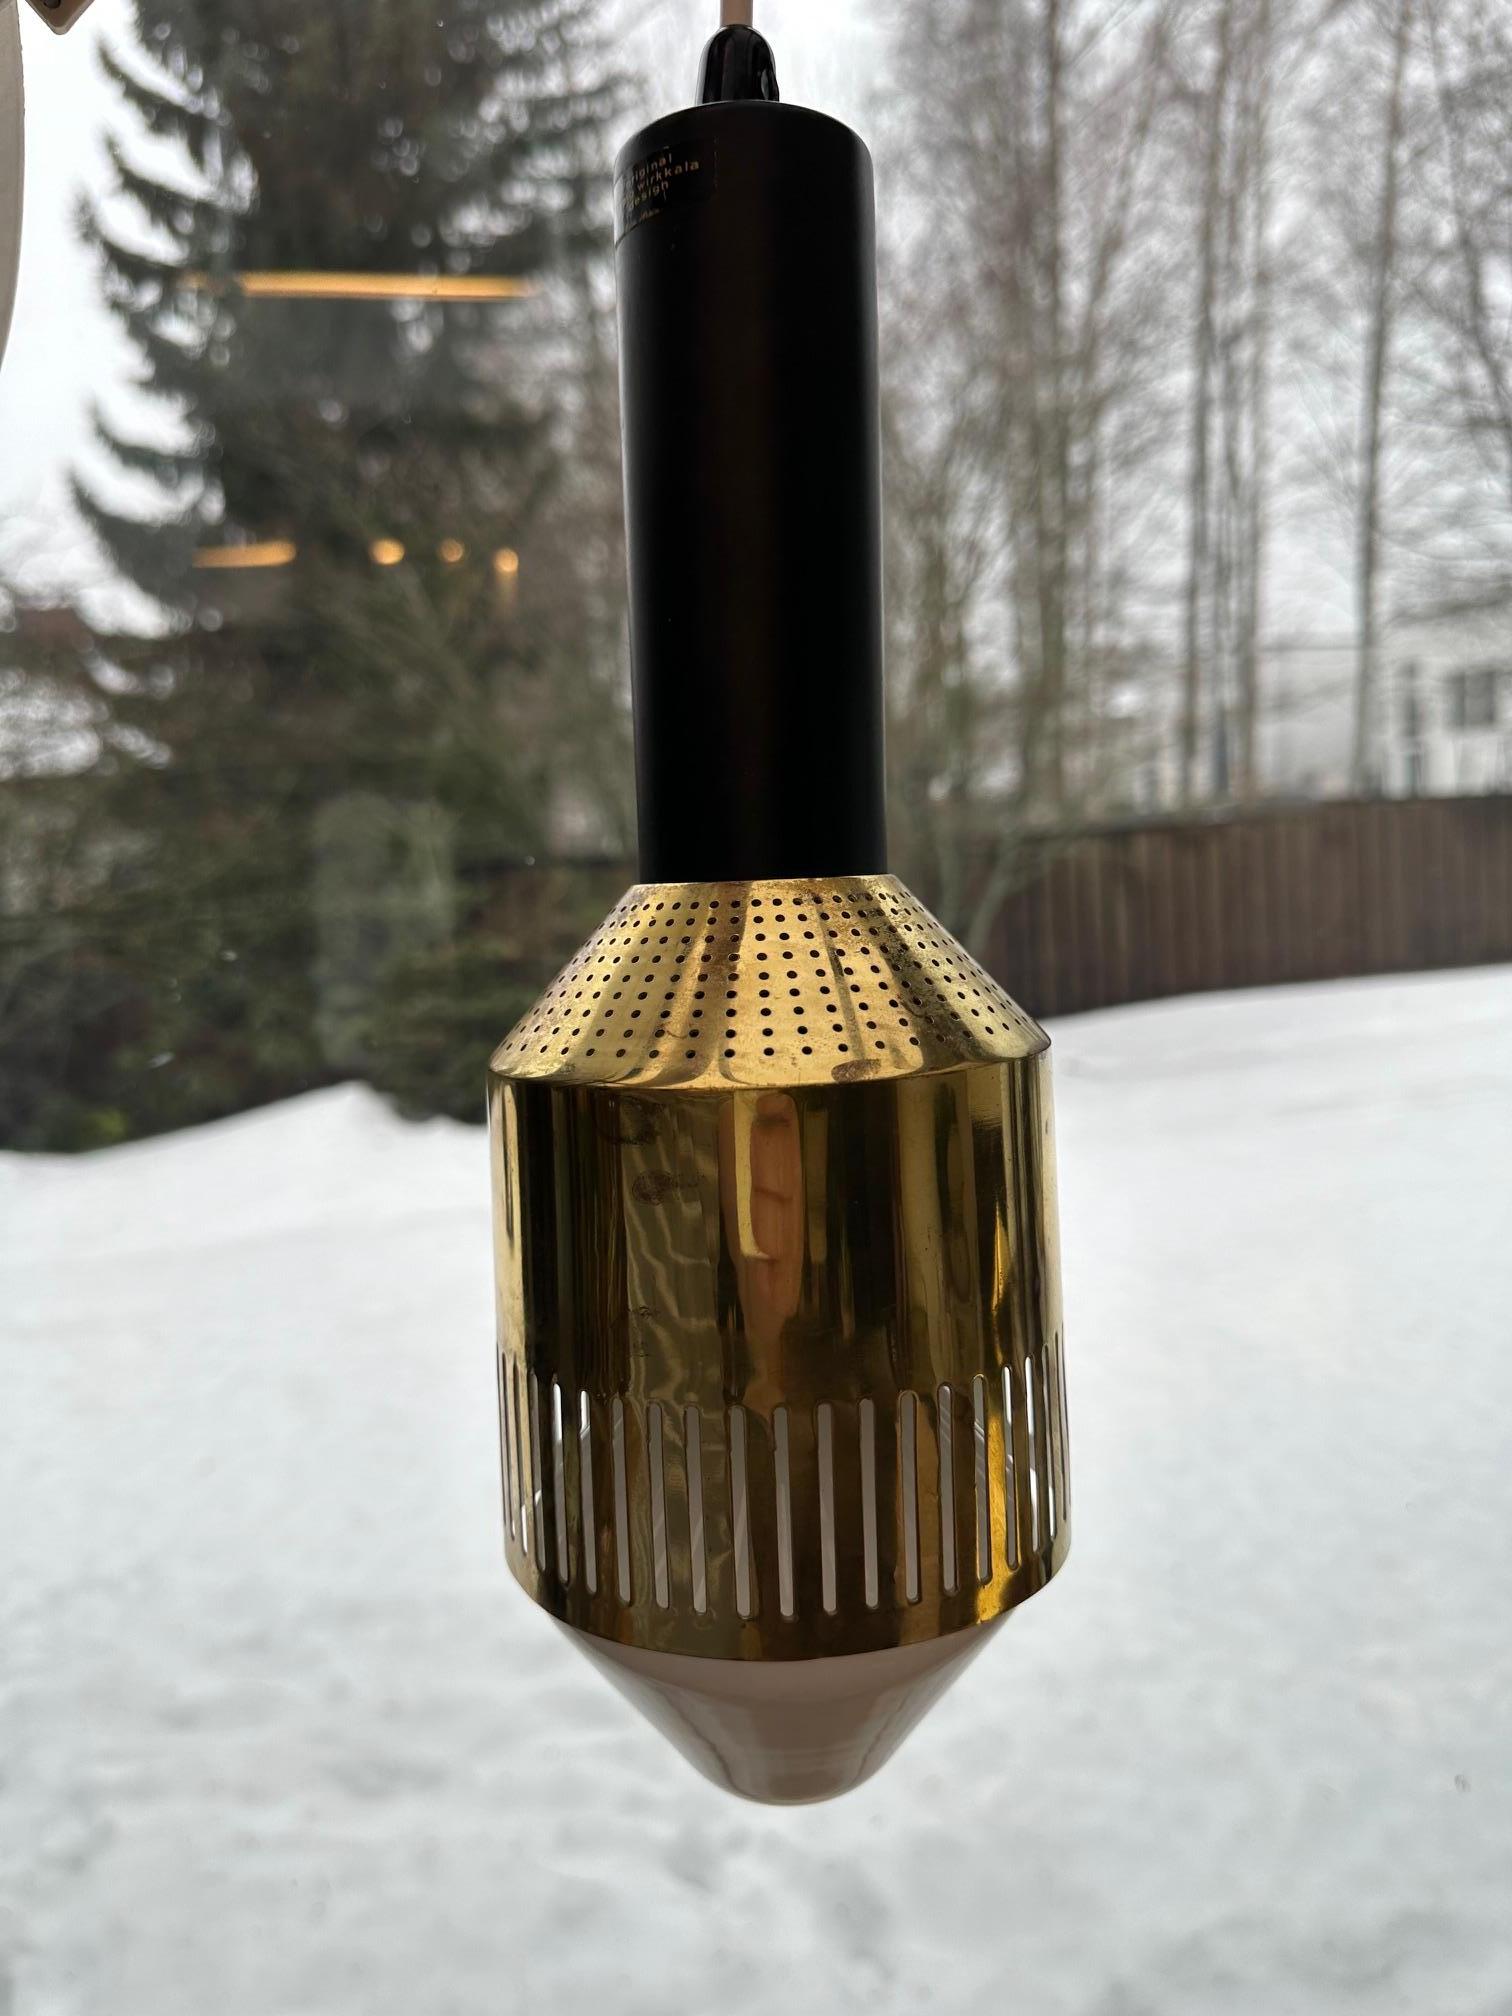 Tapio Wirkkala Rare Ceiling Lamp by Idman Oy Finland 1959-1961 In Good Condition For Sale In Espoo, FI